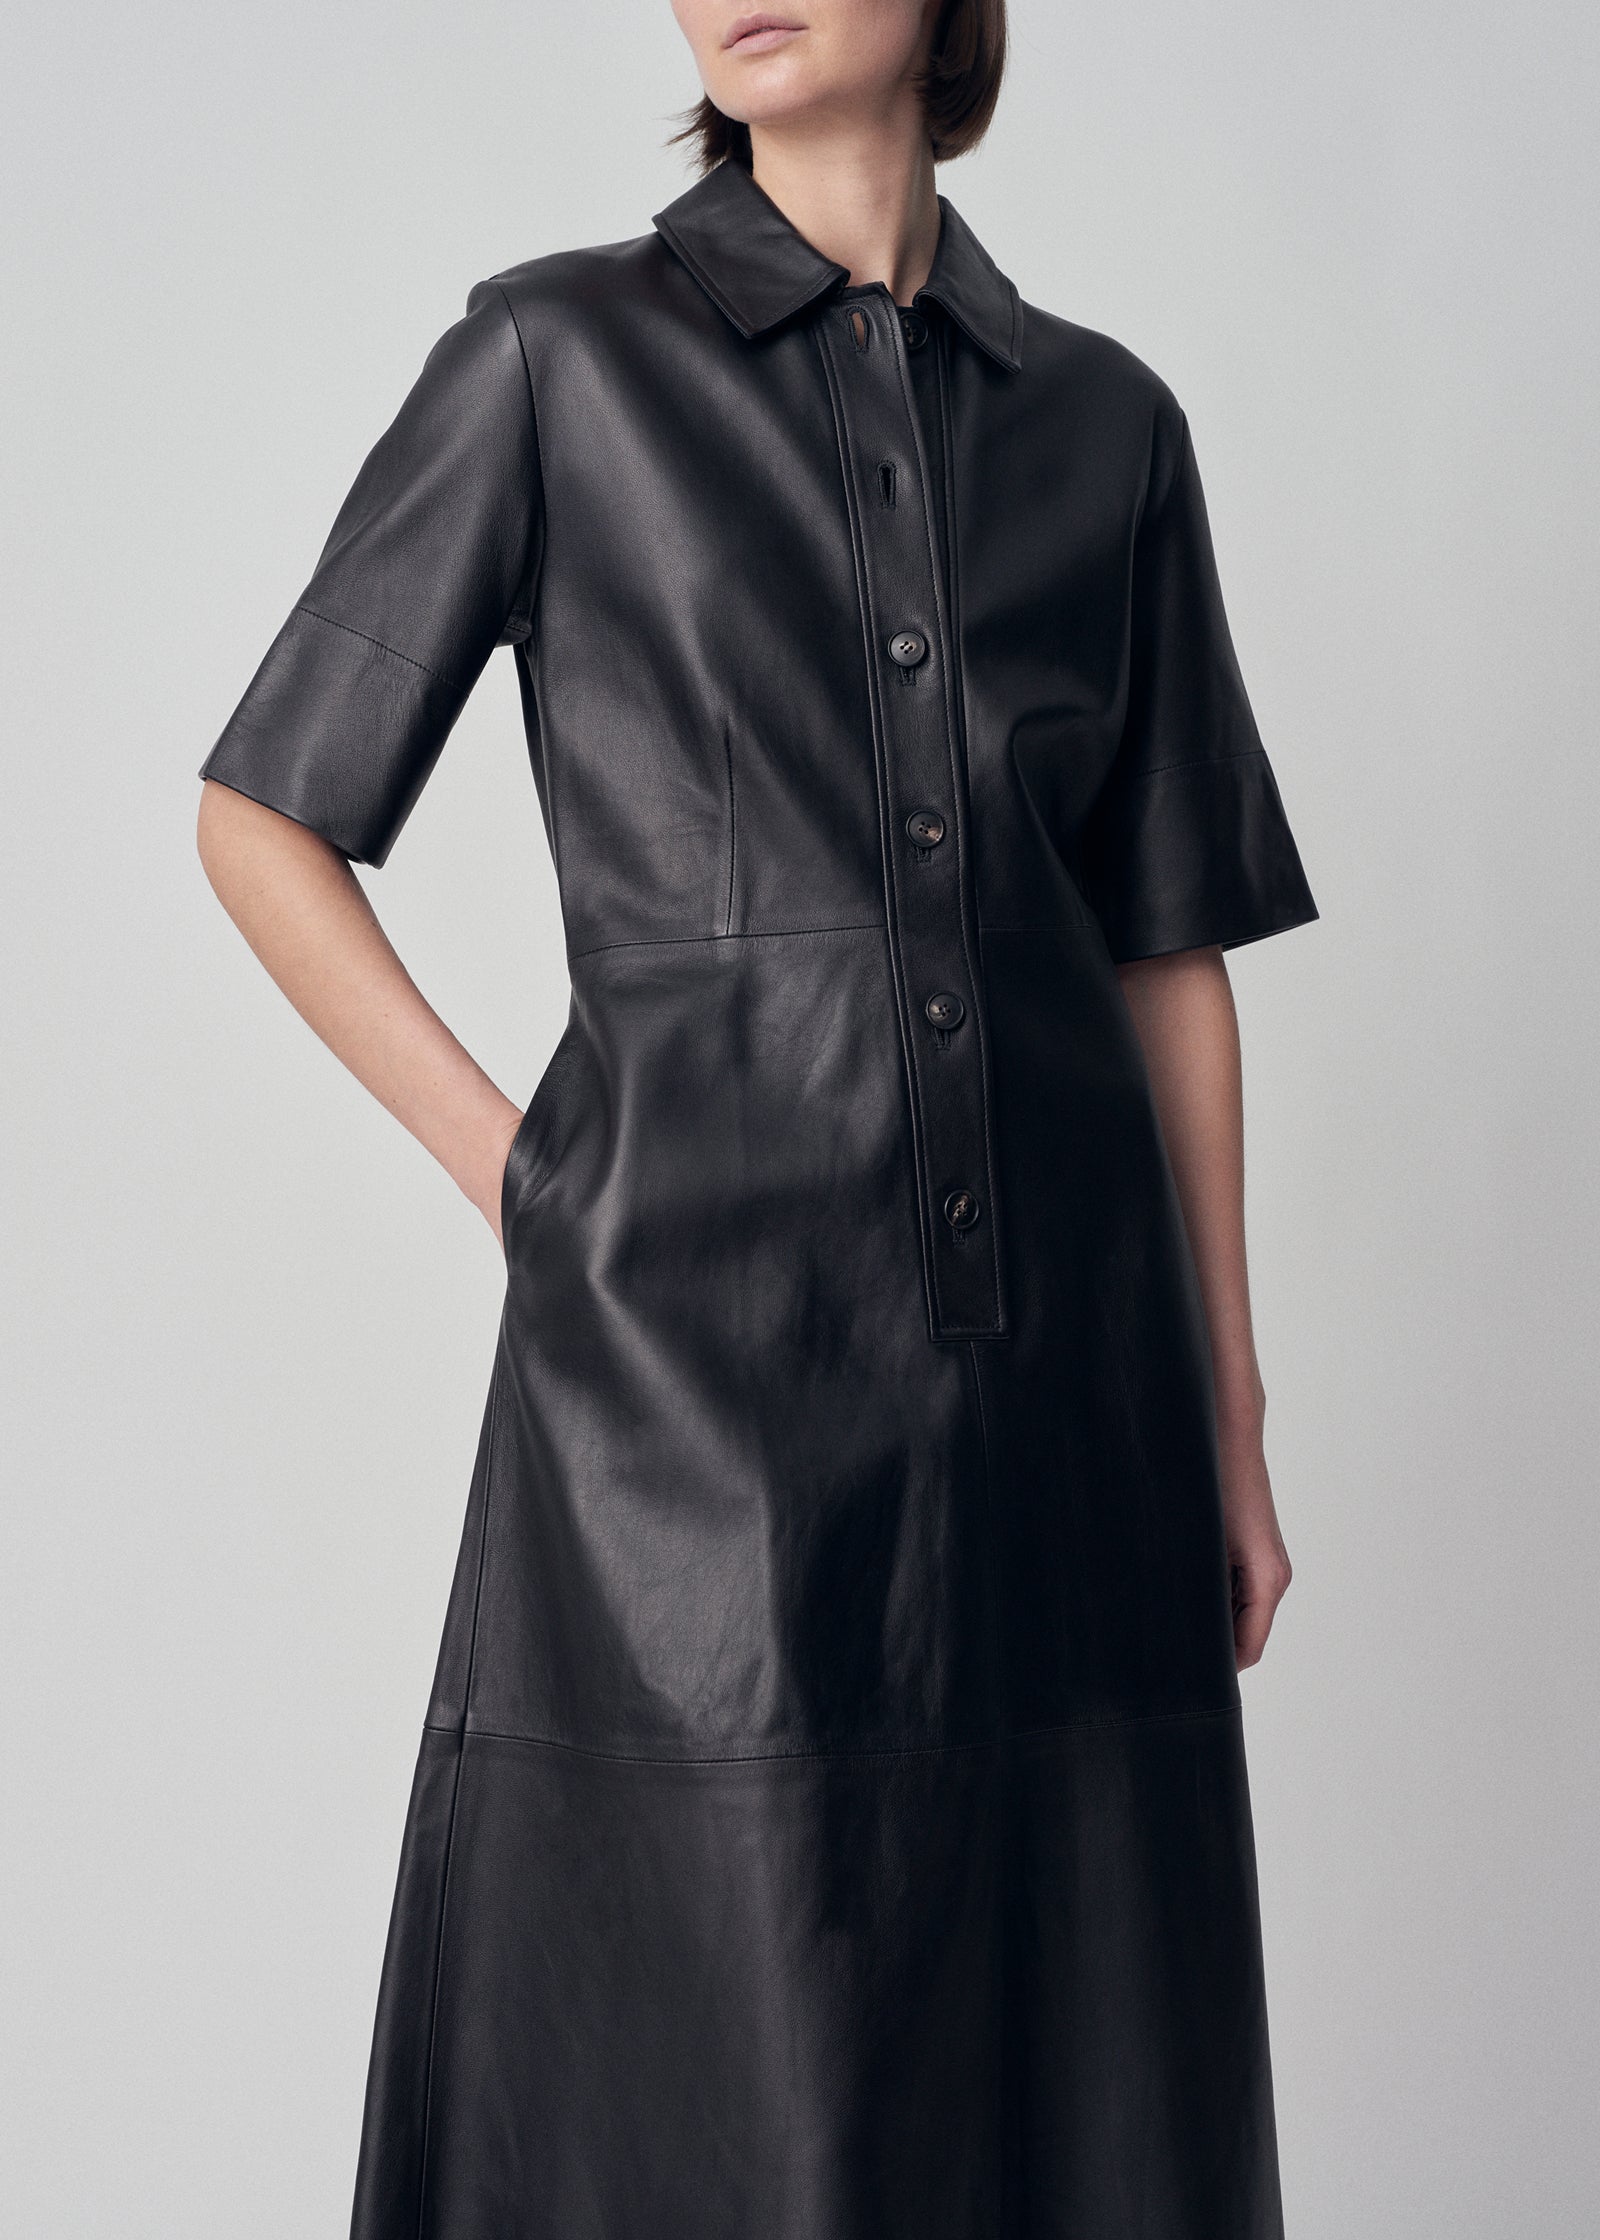 Placket Dress in Leather - Black - CO Collections